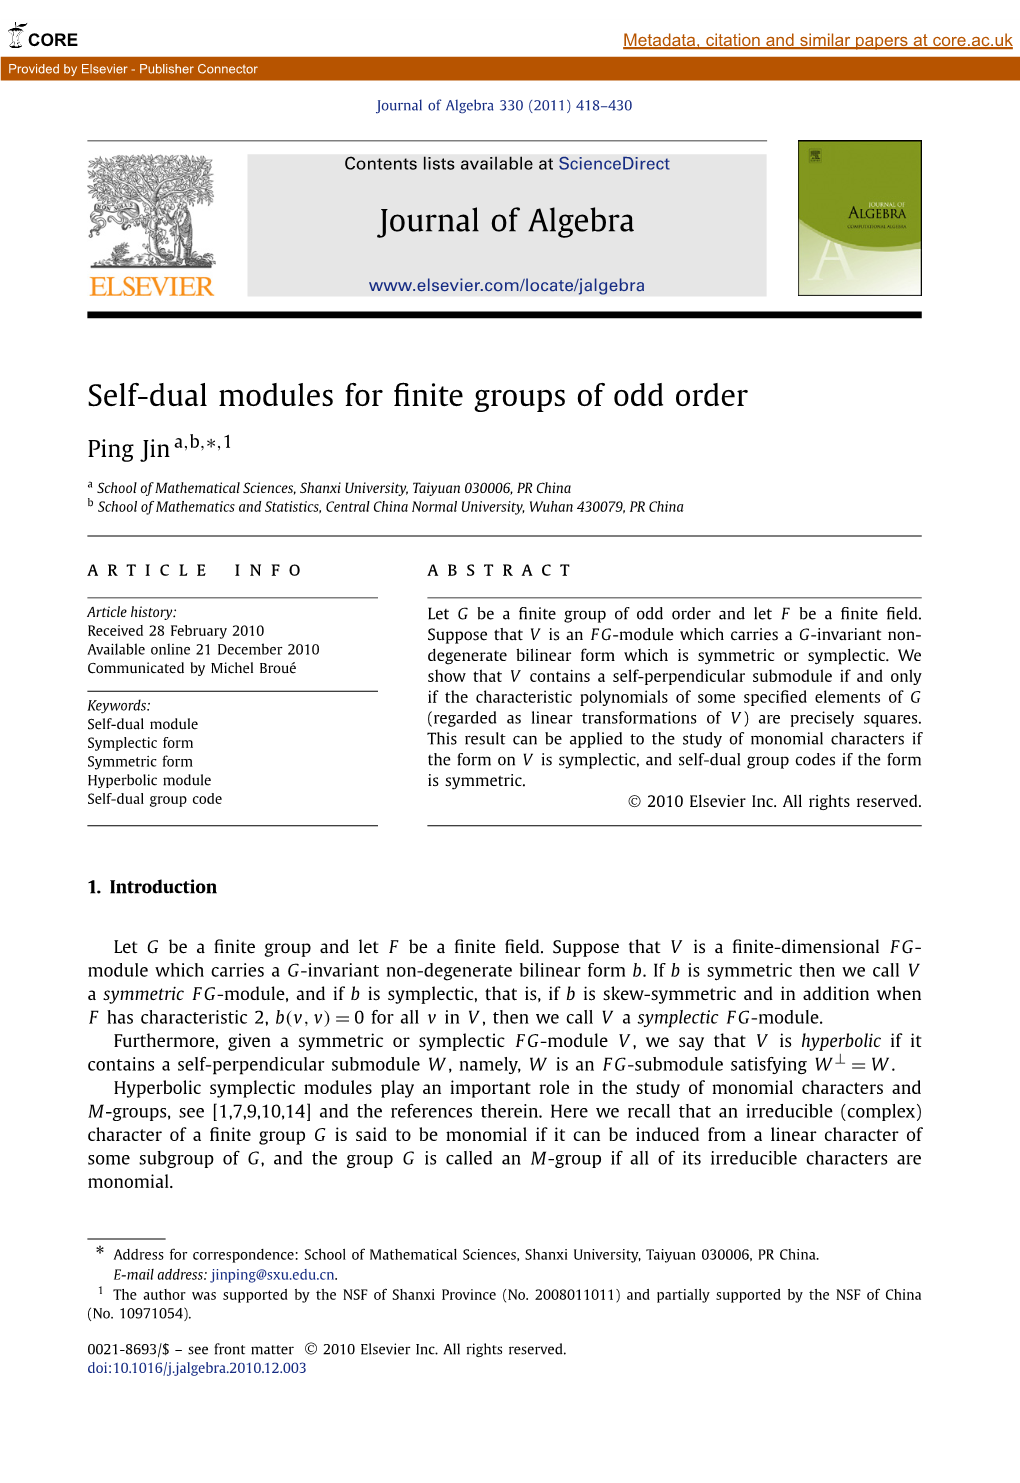 Self-Dual Modules for Finite Groups of Odd Order